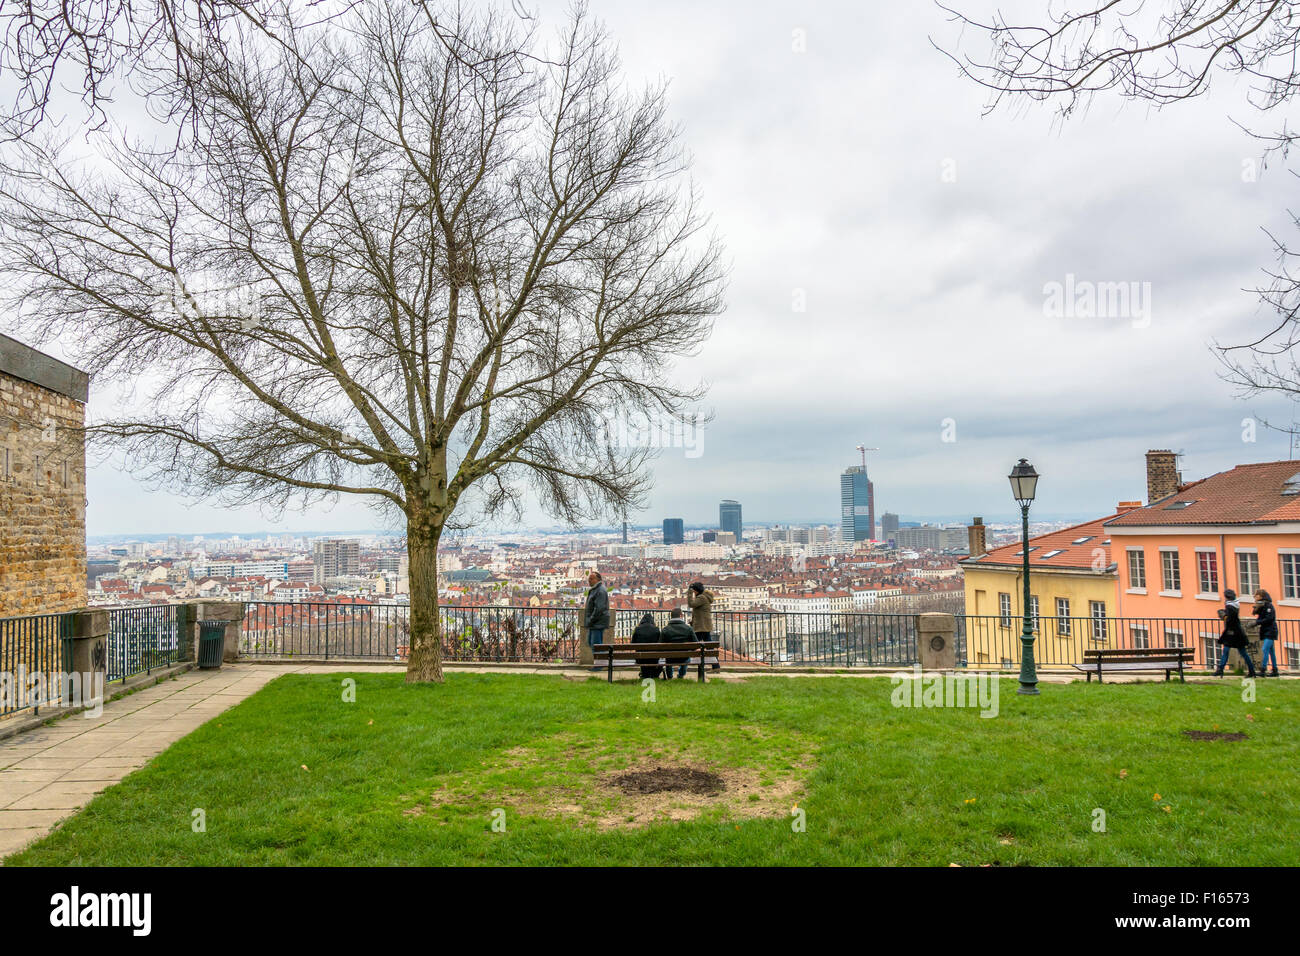 LYON, FRANCE - DECEMBER 6, 2014: panoramic day view of downtown in Lyon, France. Lyon is the capital of the Rhone-Alpes region Stock Photo